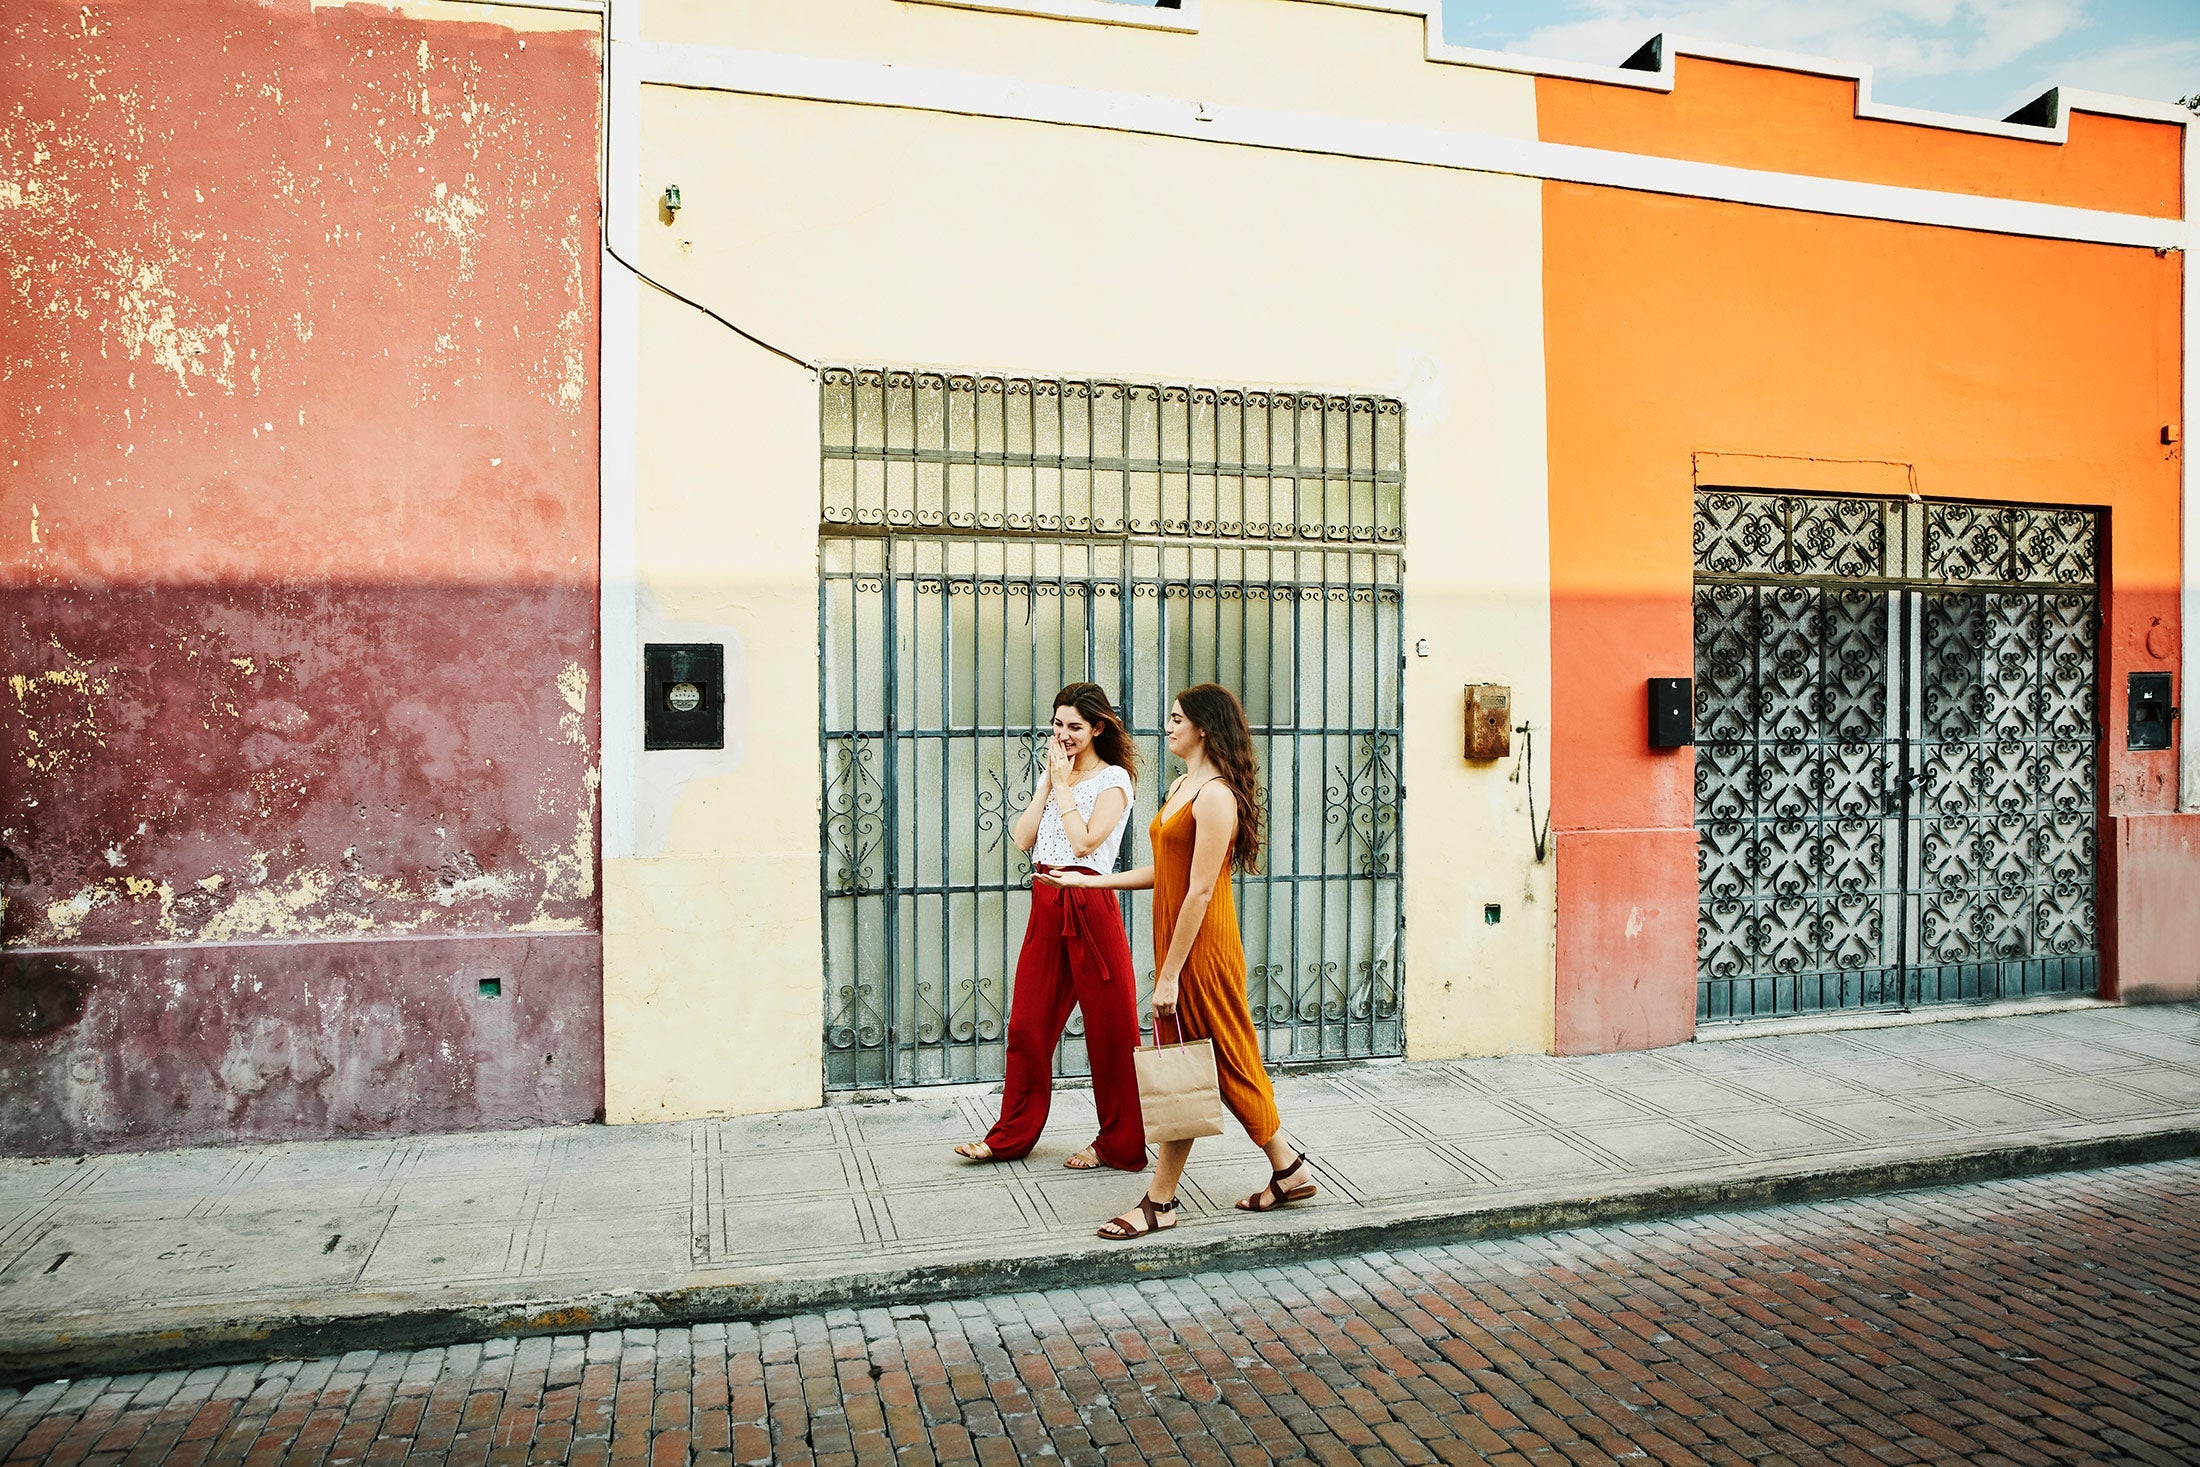 Two women walking down a brightly painted street.